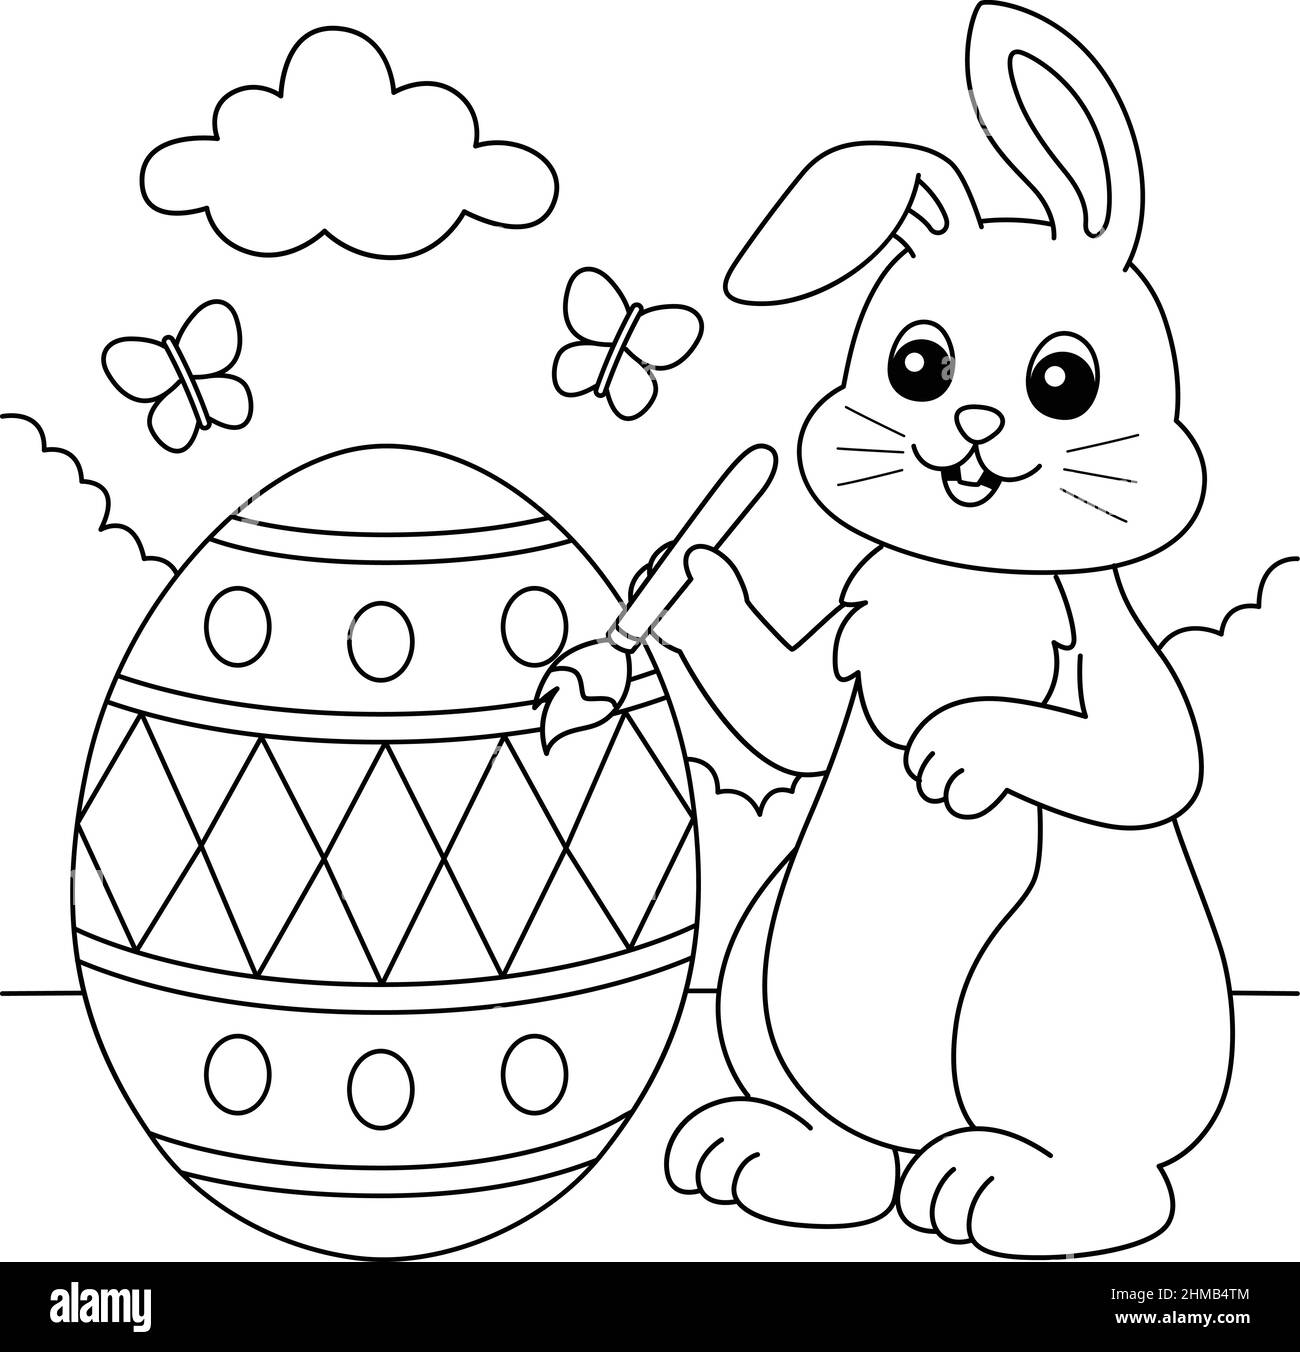 Rabiit Painting Easter Egg Coloring Page für Kinder Stock ...